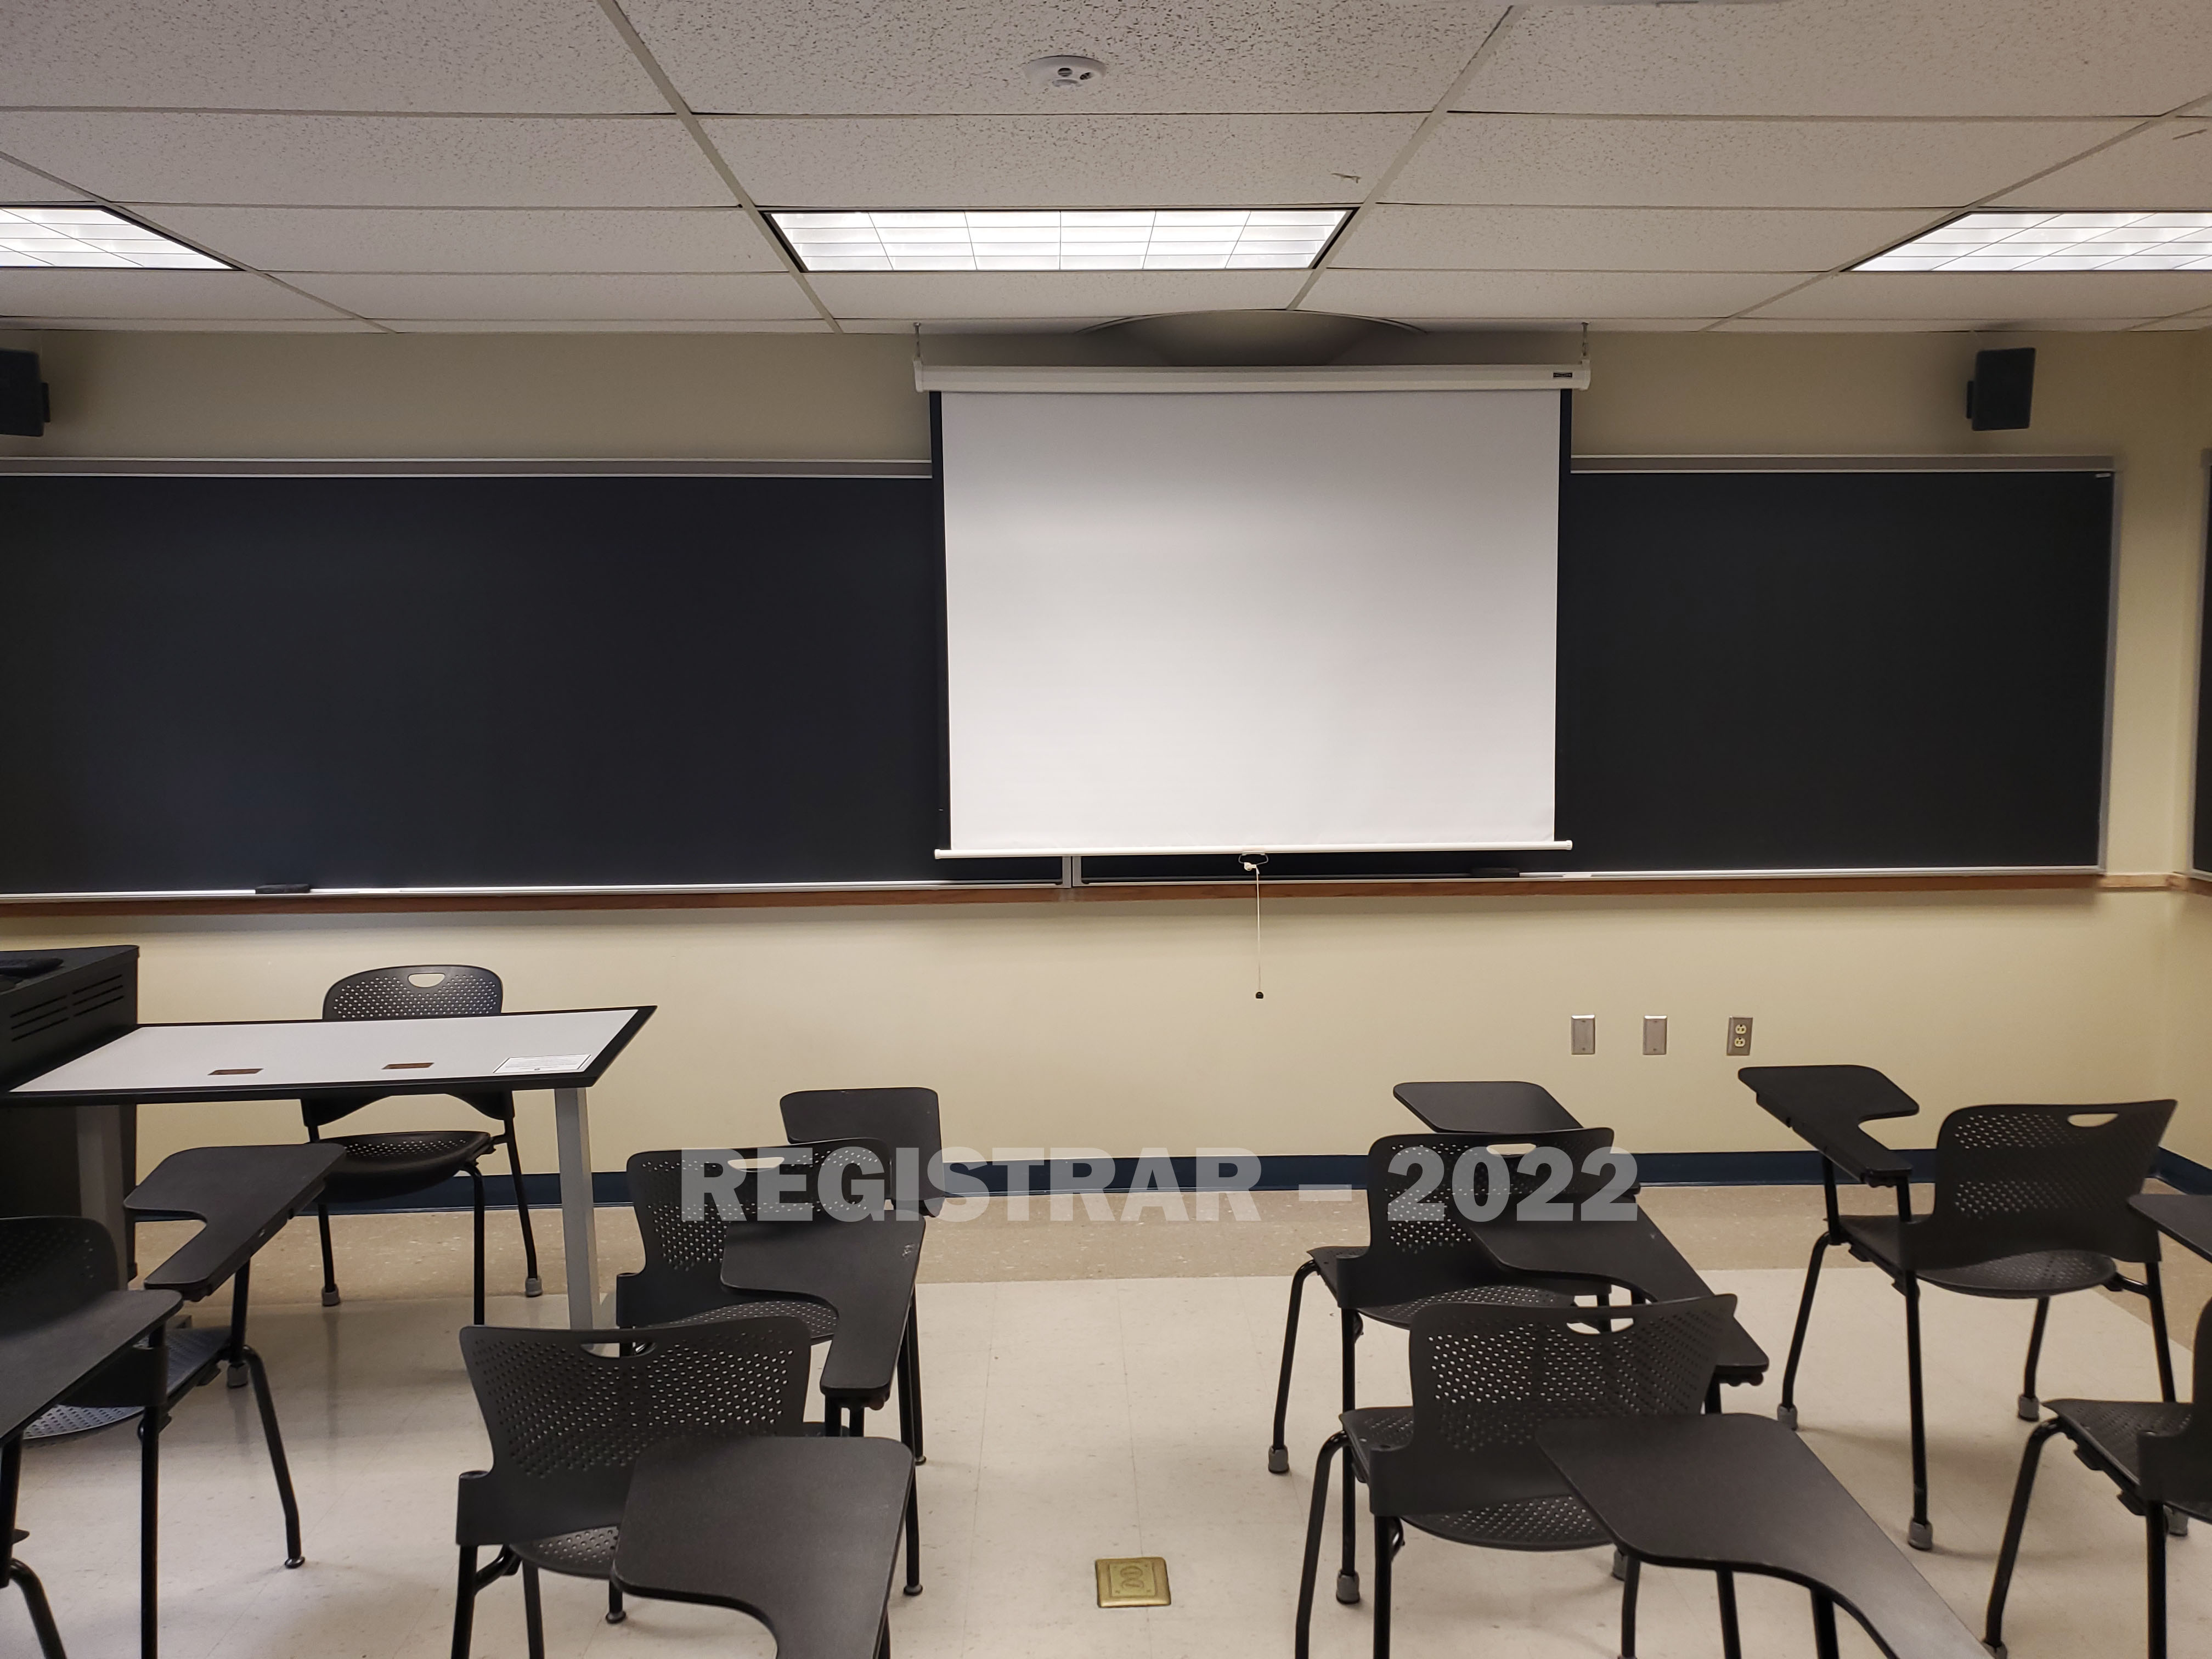 Enarson Classroom Building room 212 view from the back of the room with projector screen down